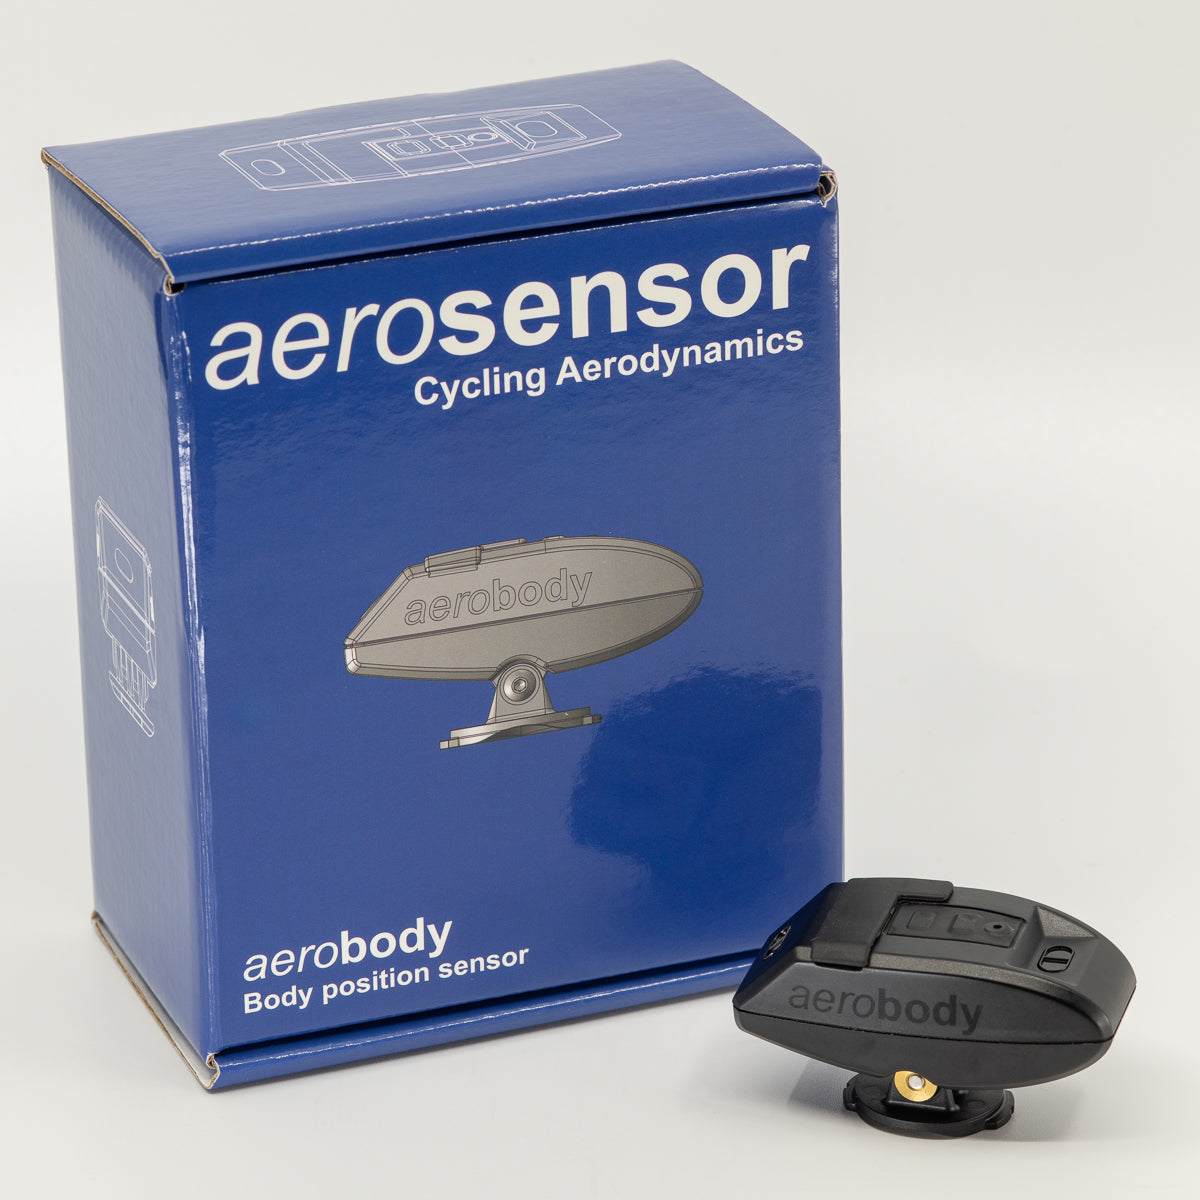 aerobody cycling device with promotional packaging